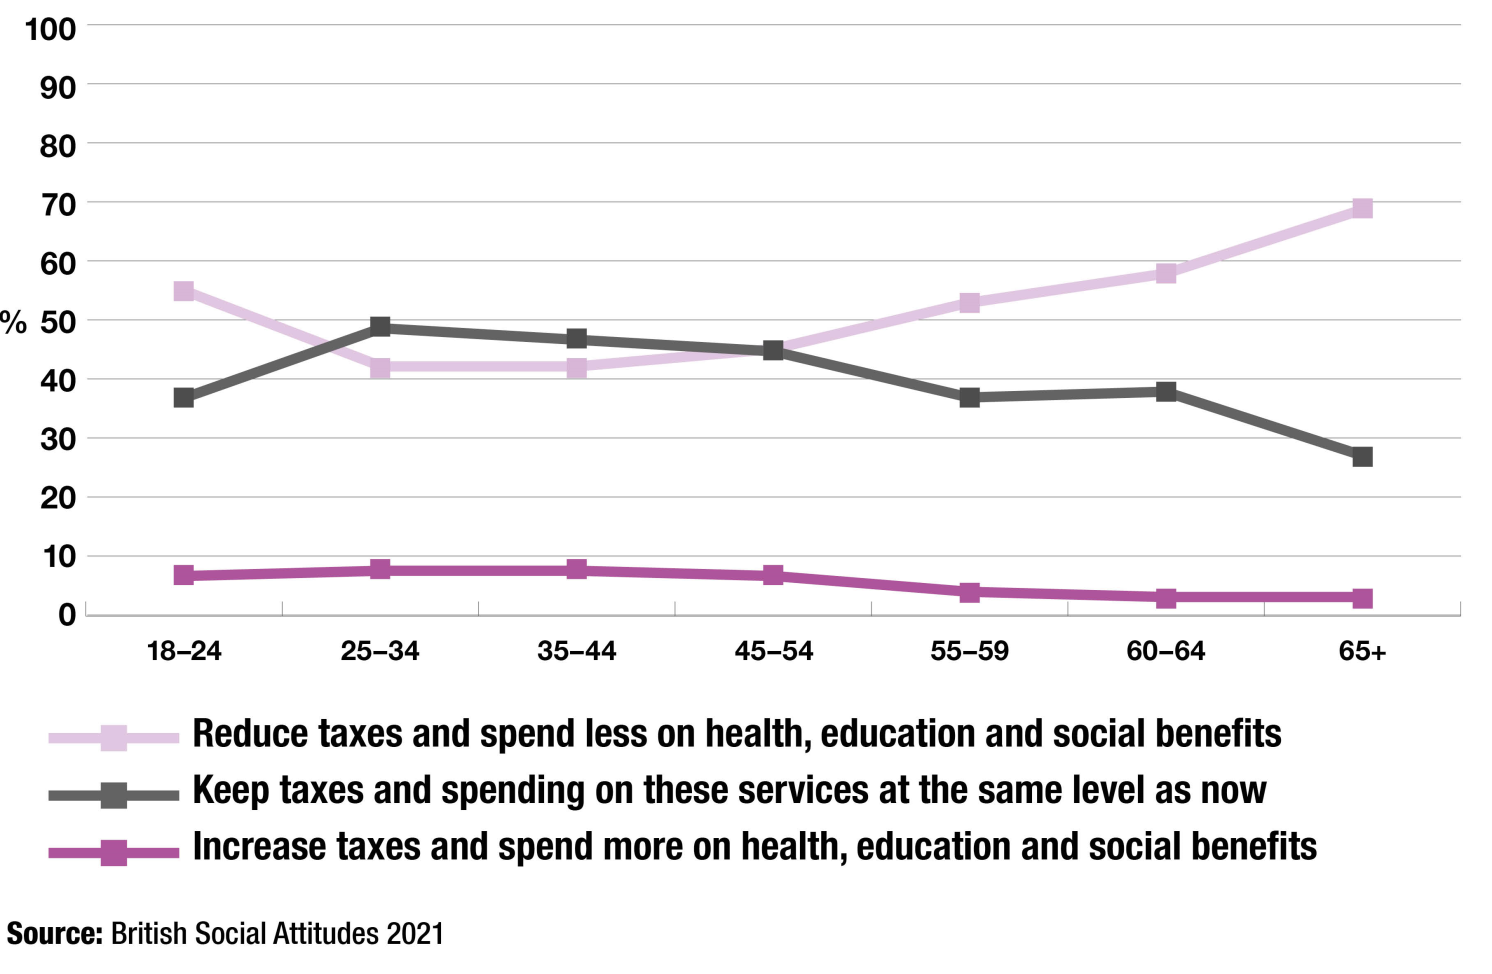 Graph displaying attitudes towards taxation and public spending by age group, 2021